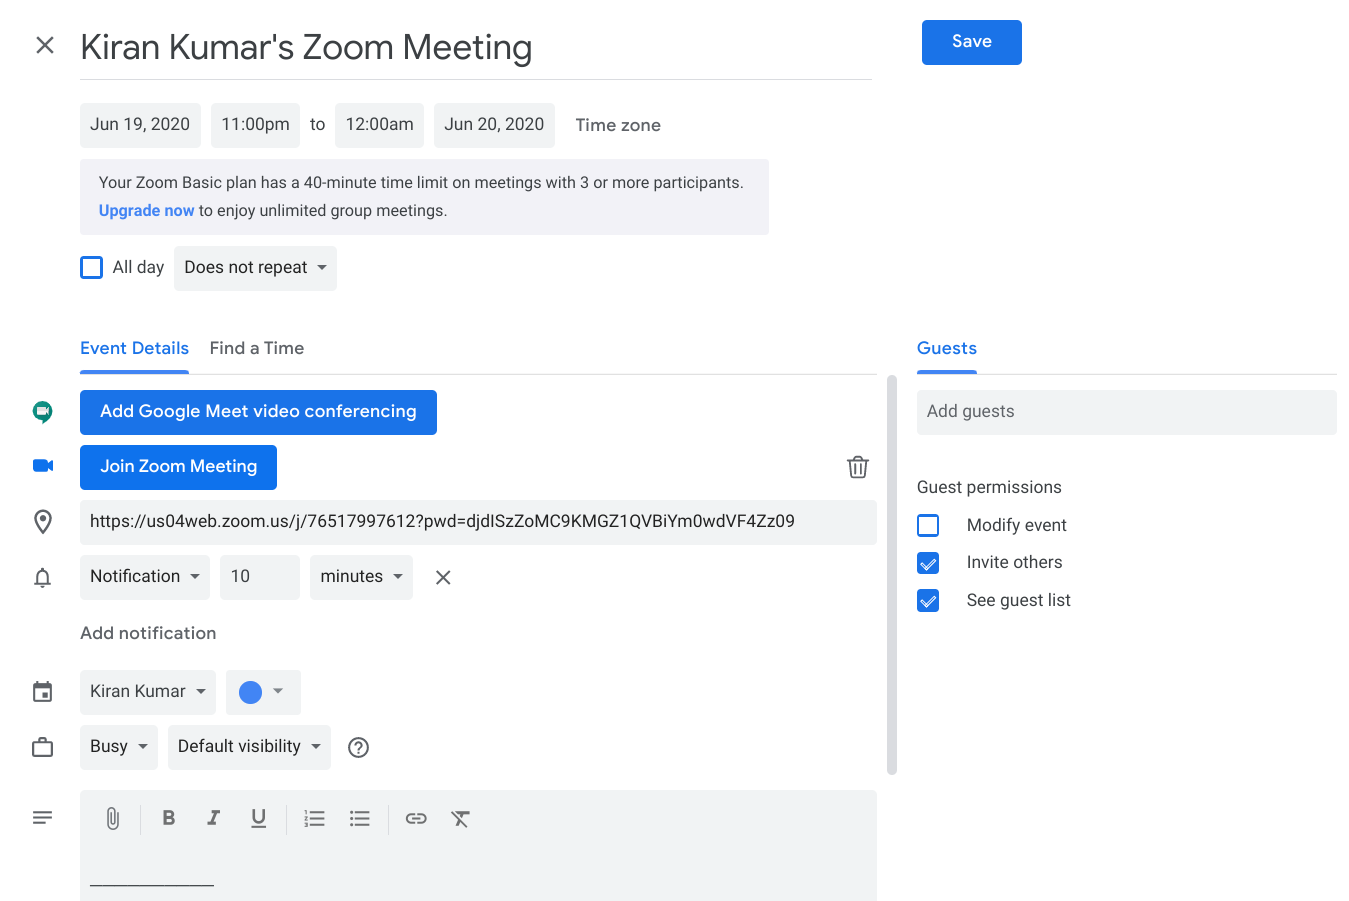 how to download zoom on chromebook